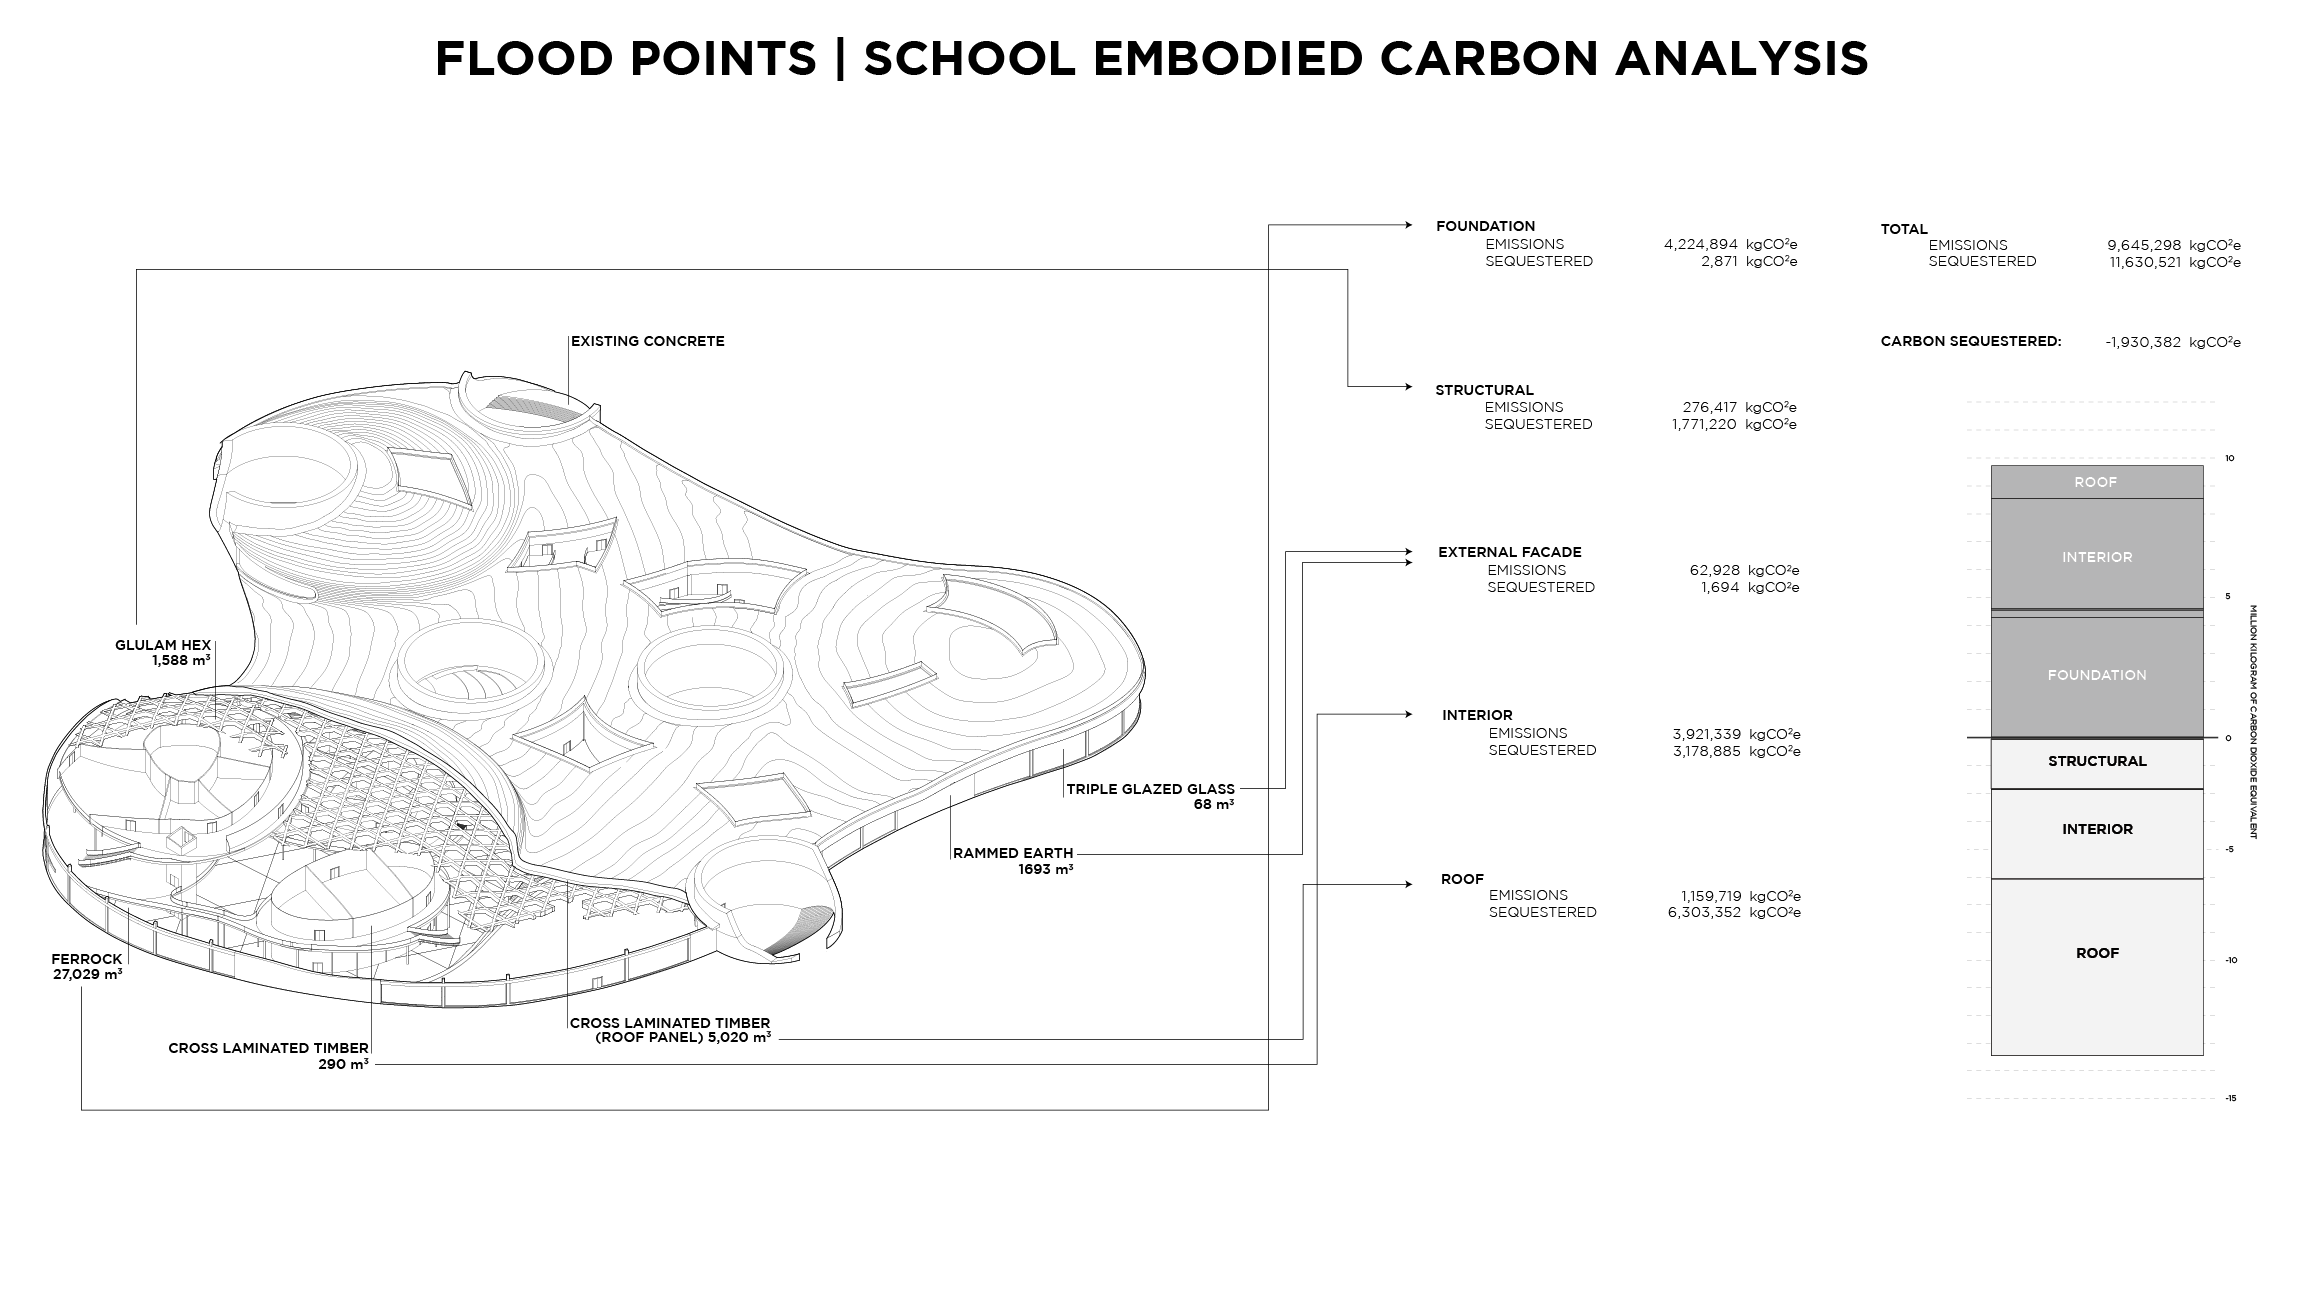 FLOODPOINTS_School Embodied Carbon Analysis.png